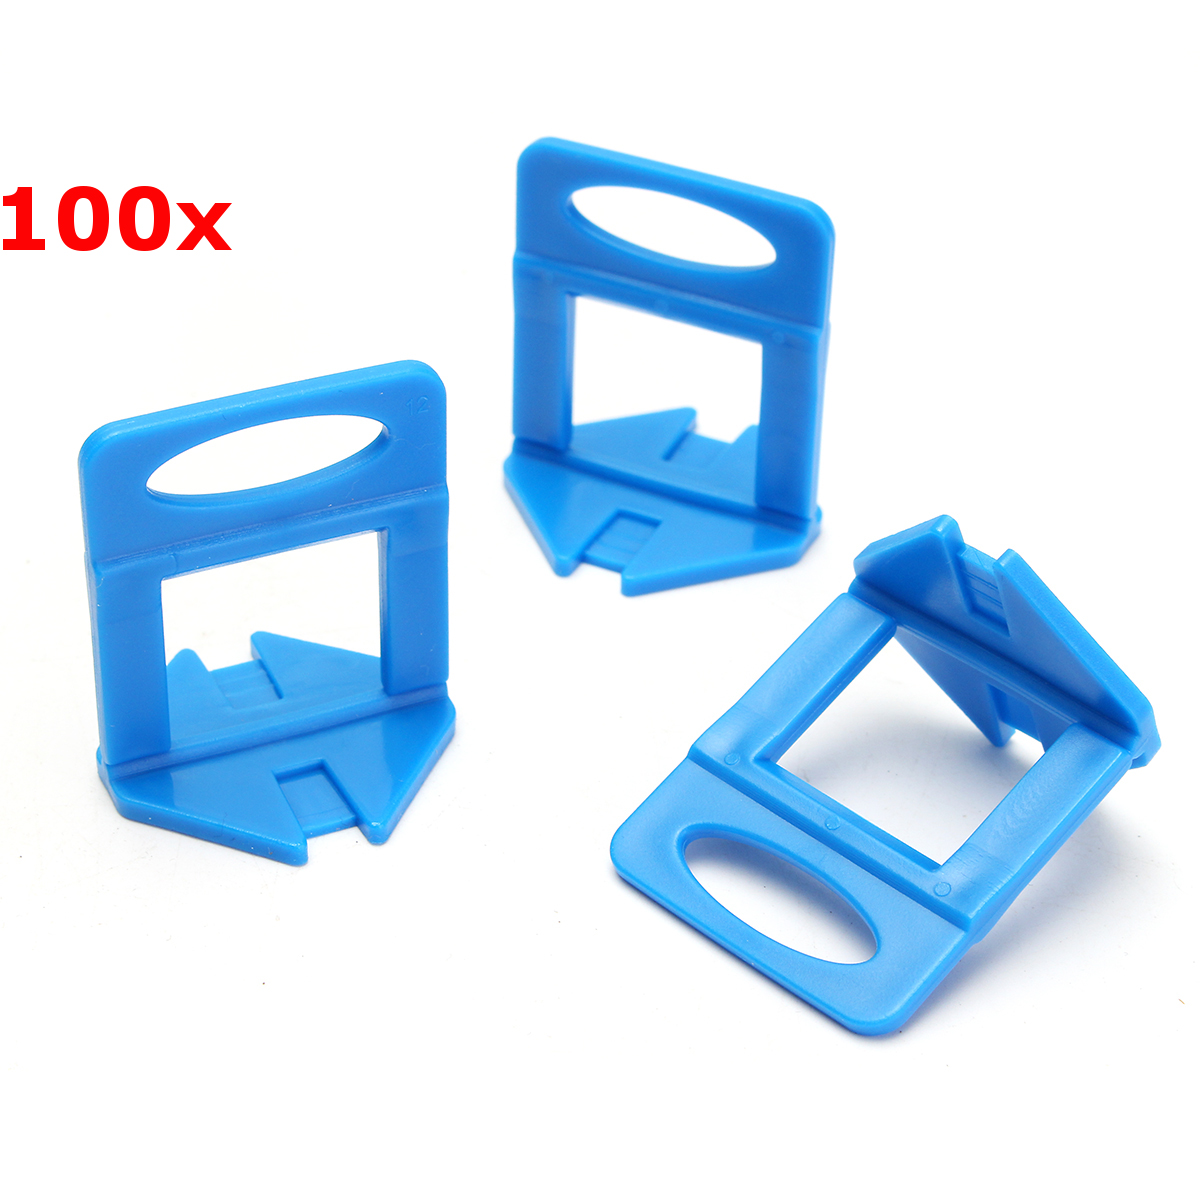 100Pcs-Leveler-Ceramic-Clips-Spacers-Plastic-Tile-Wall-Floor-Leveling-System-Tool-1123522-1